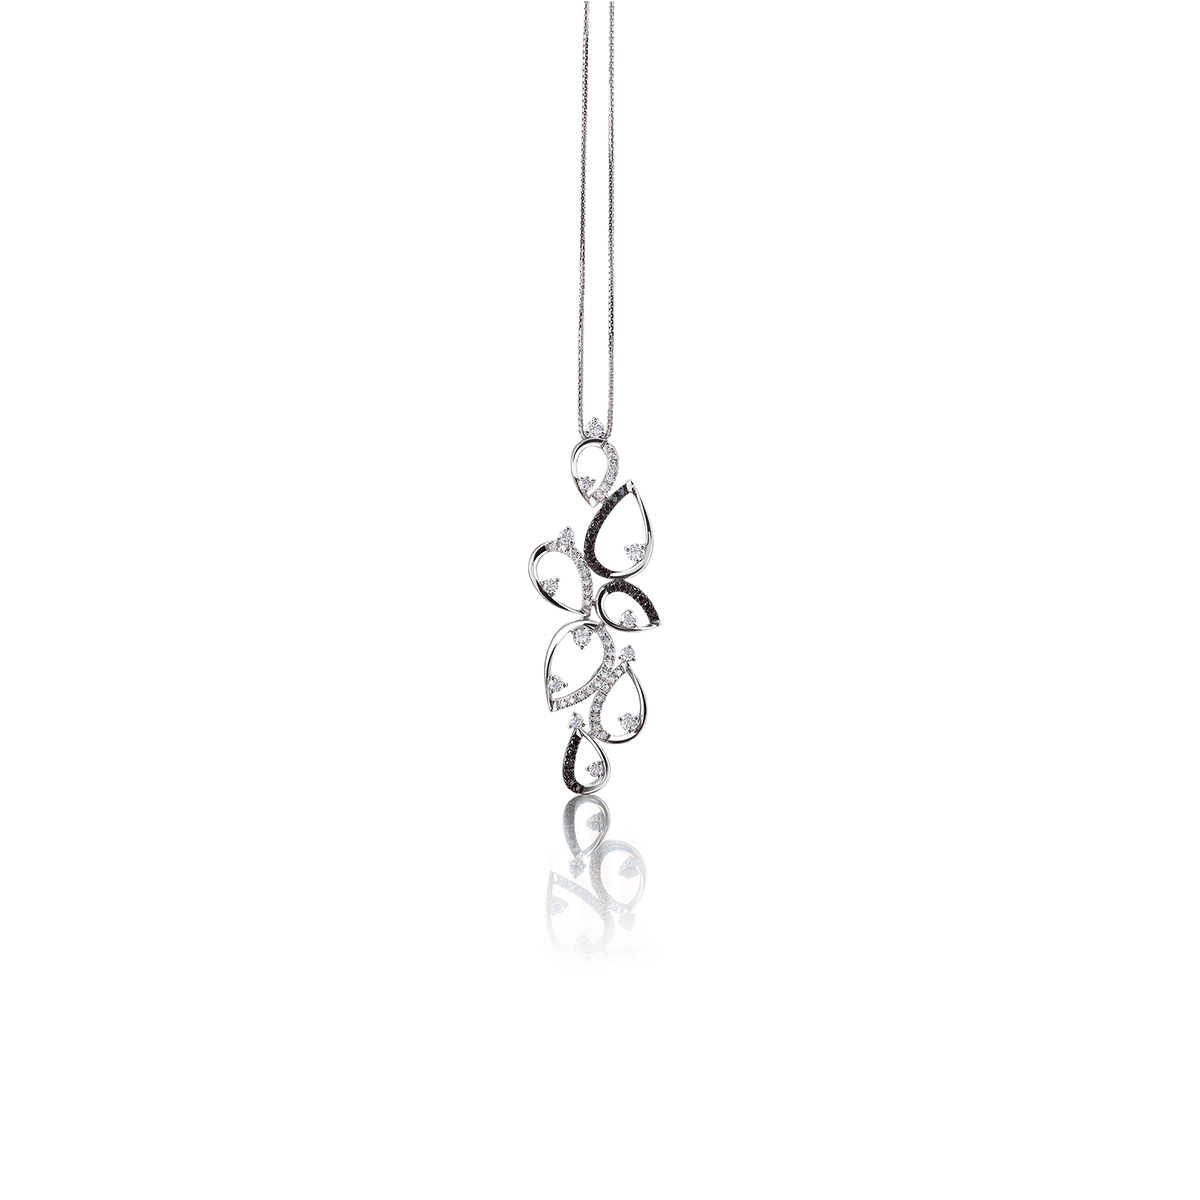 18 K White Gold Multi-Drop Necklace with Black and White Diamonds